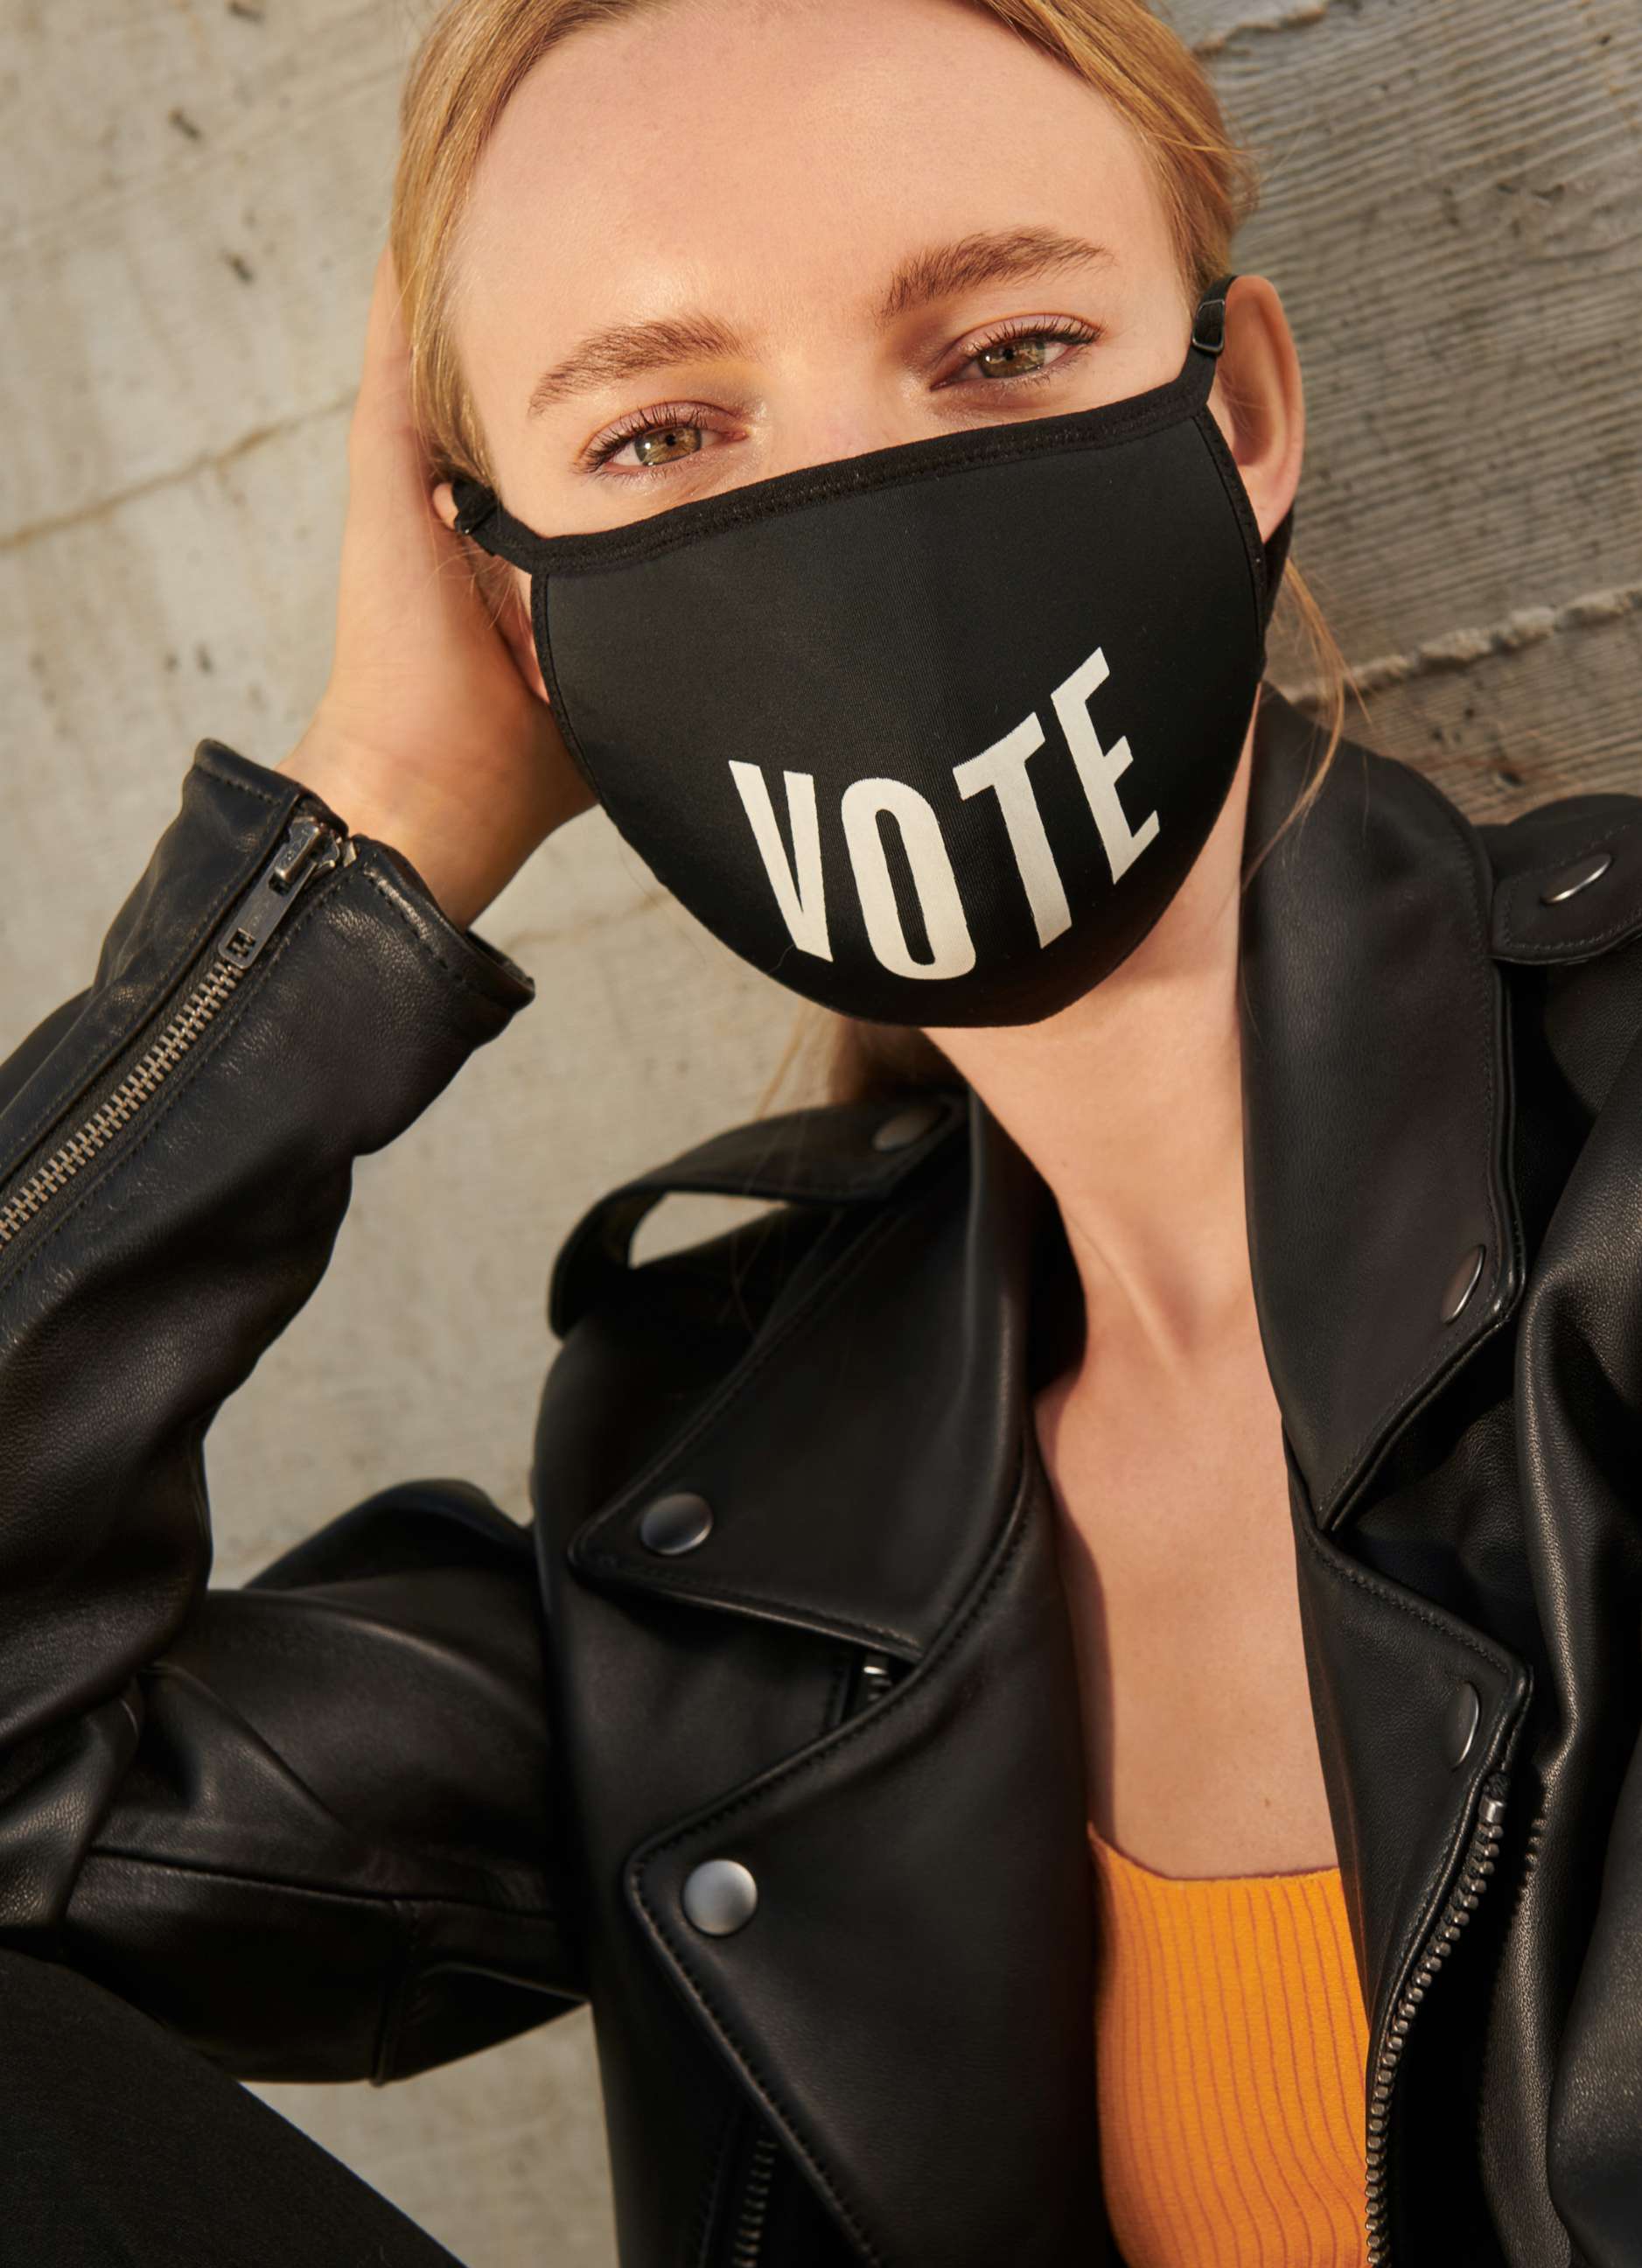 PHOTO: Bloomingdale's teamed up with Allen Hughes to release a limited edition "vote" face mask to help support the When We All Vote organization.